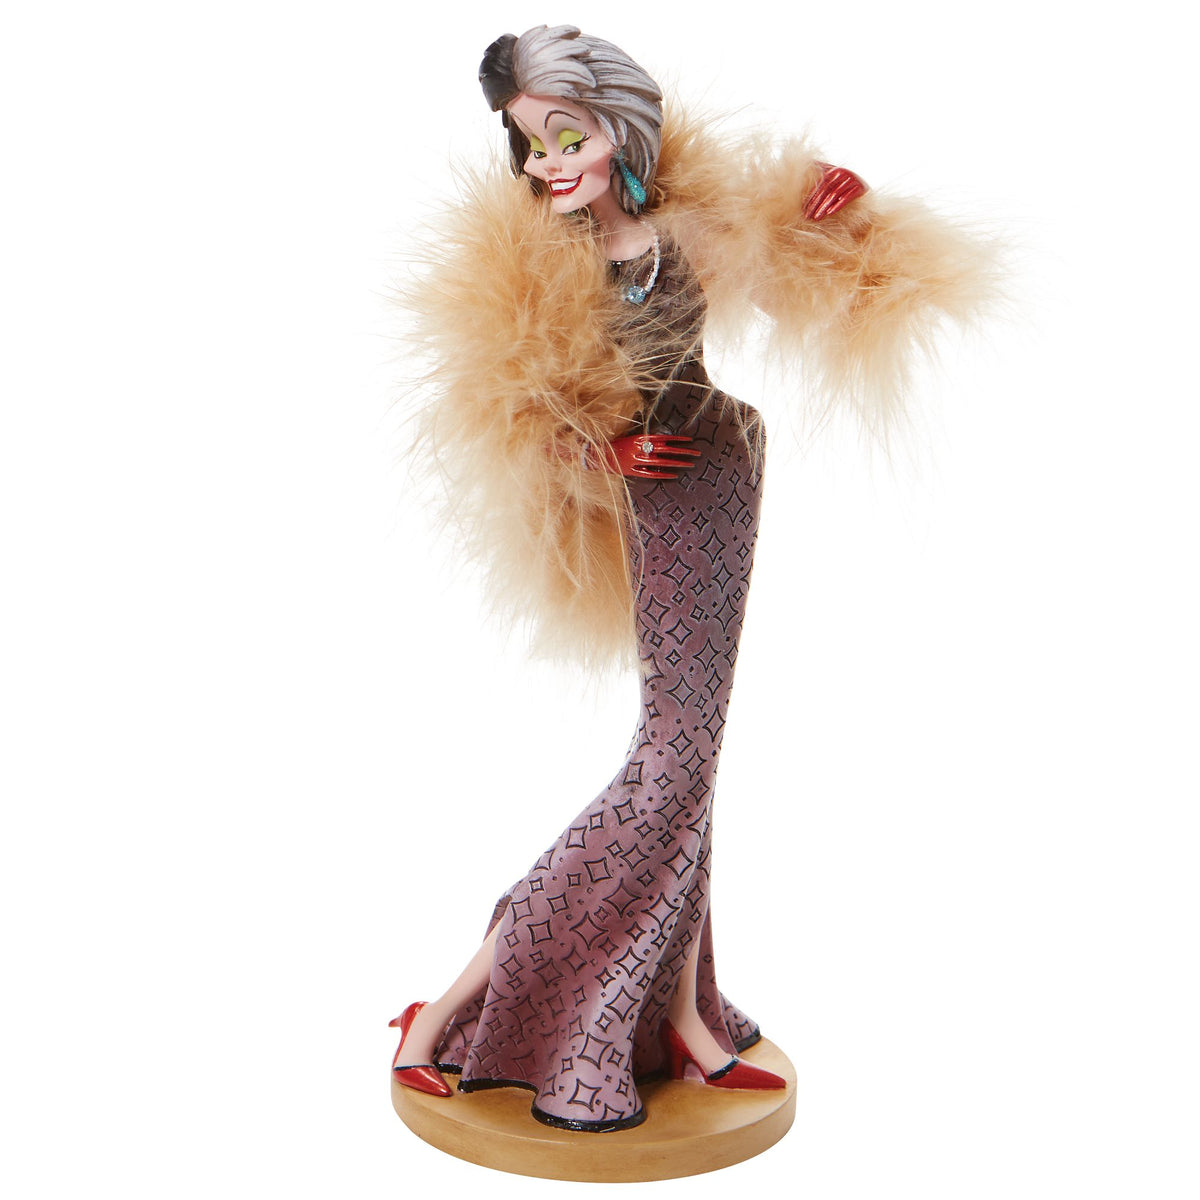 Disney's Cruella Collection Adds a Limited Edition Doll